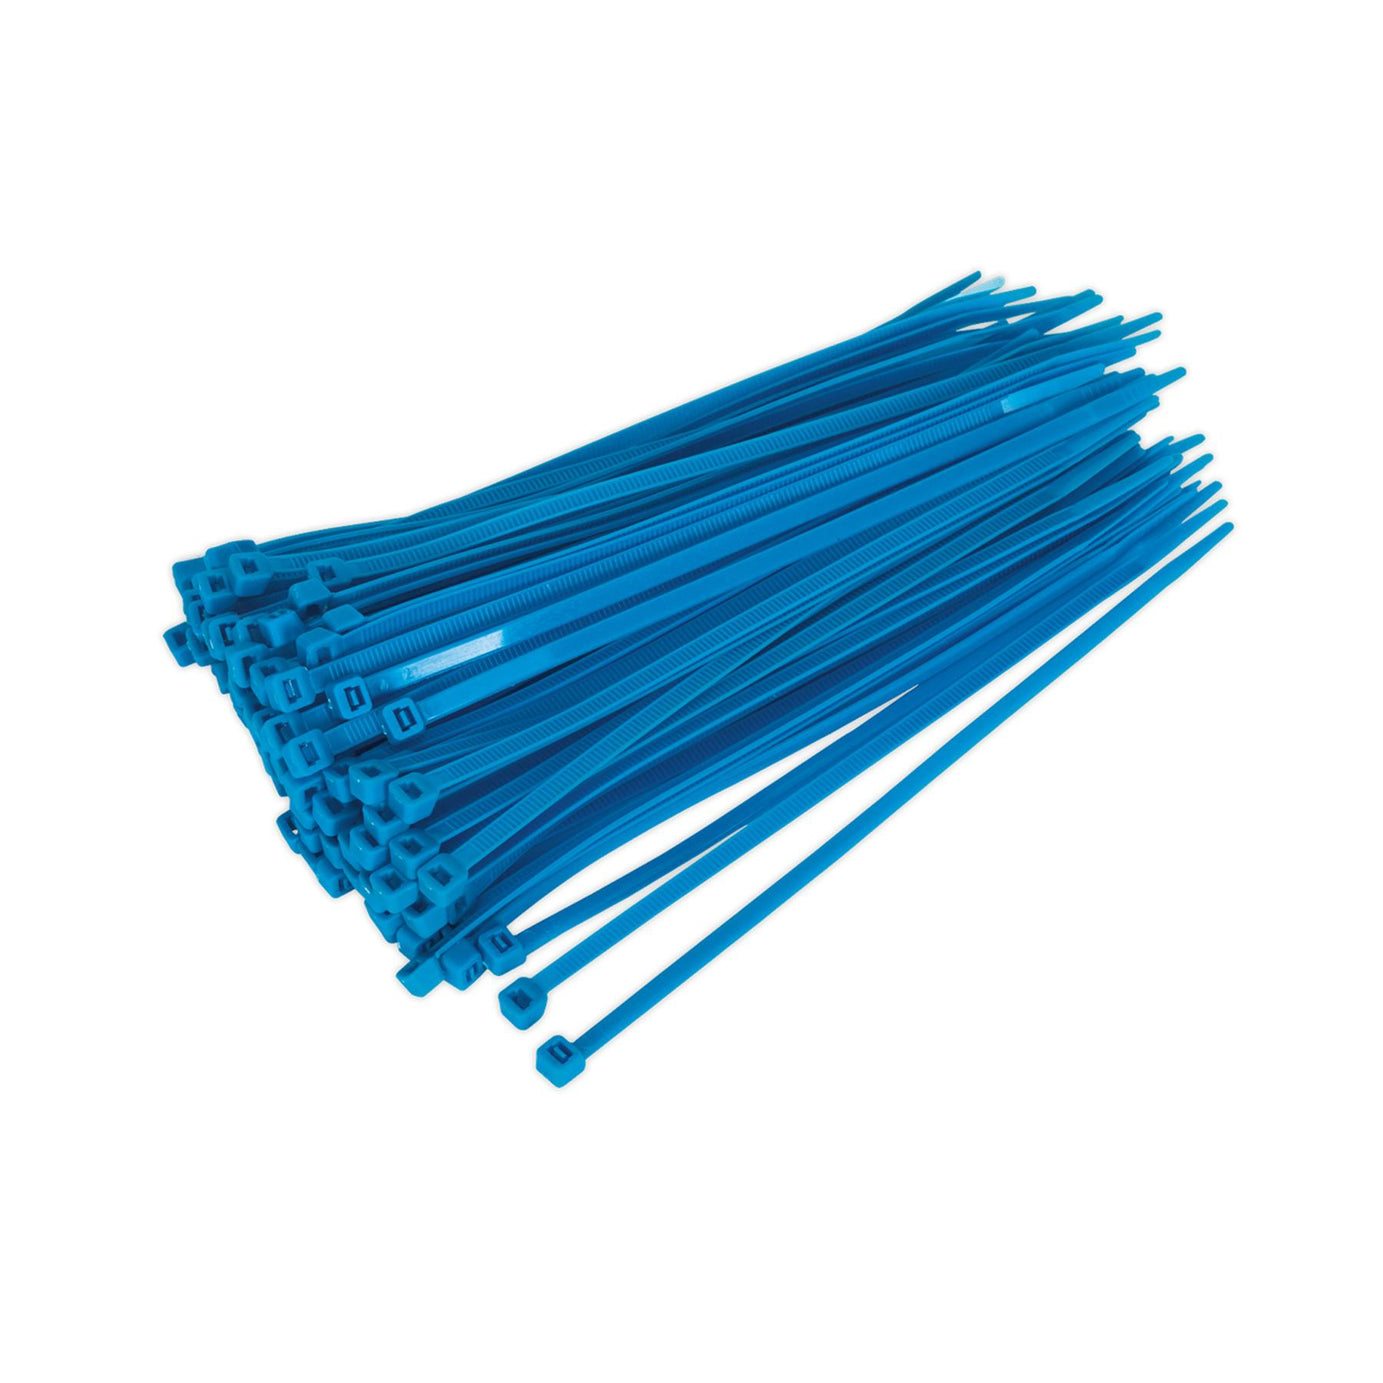 Sealey Cable Tie 200 x 4.8mm Blue Pack of 100